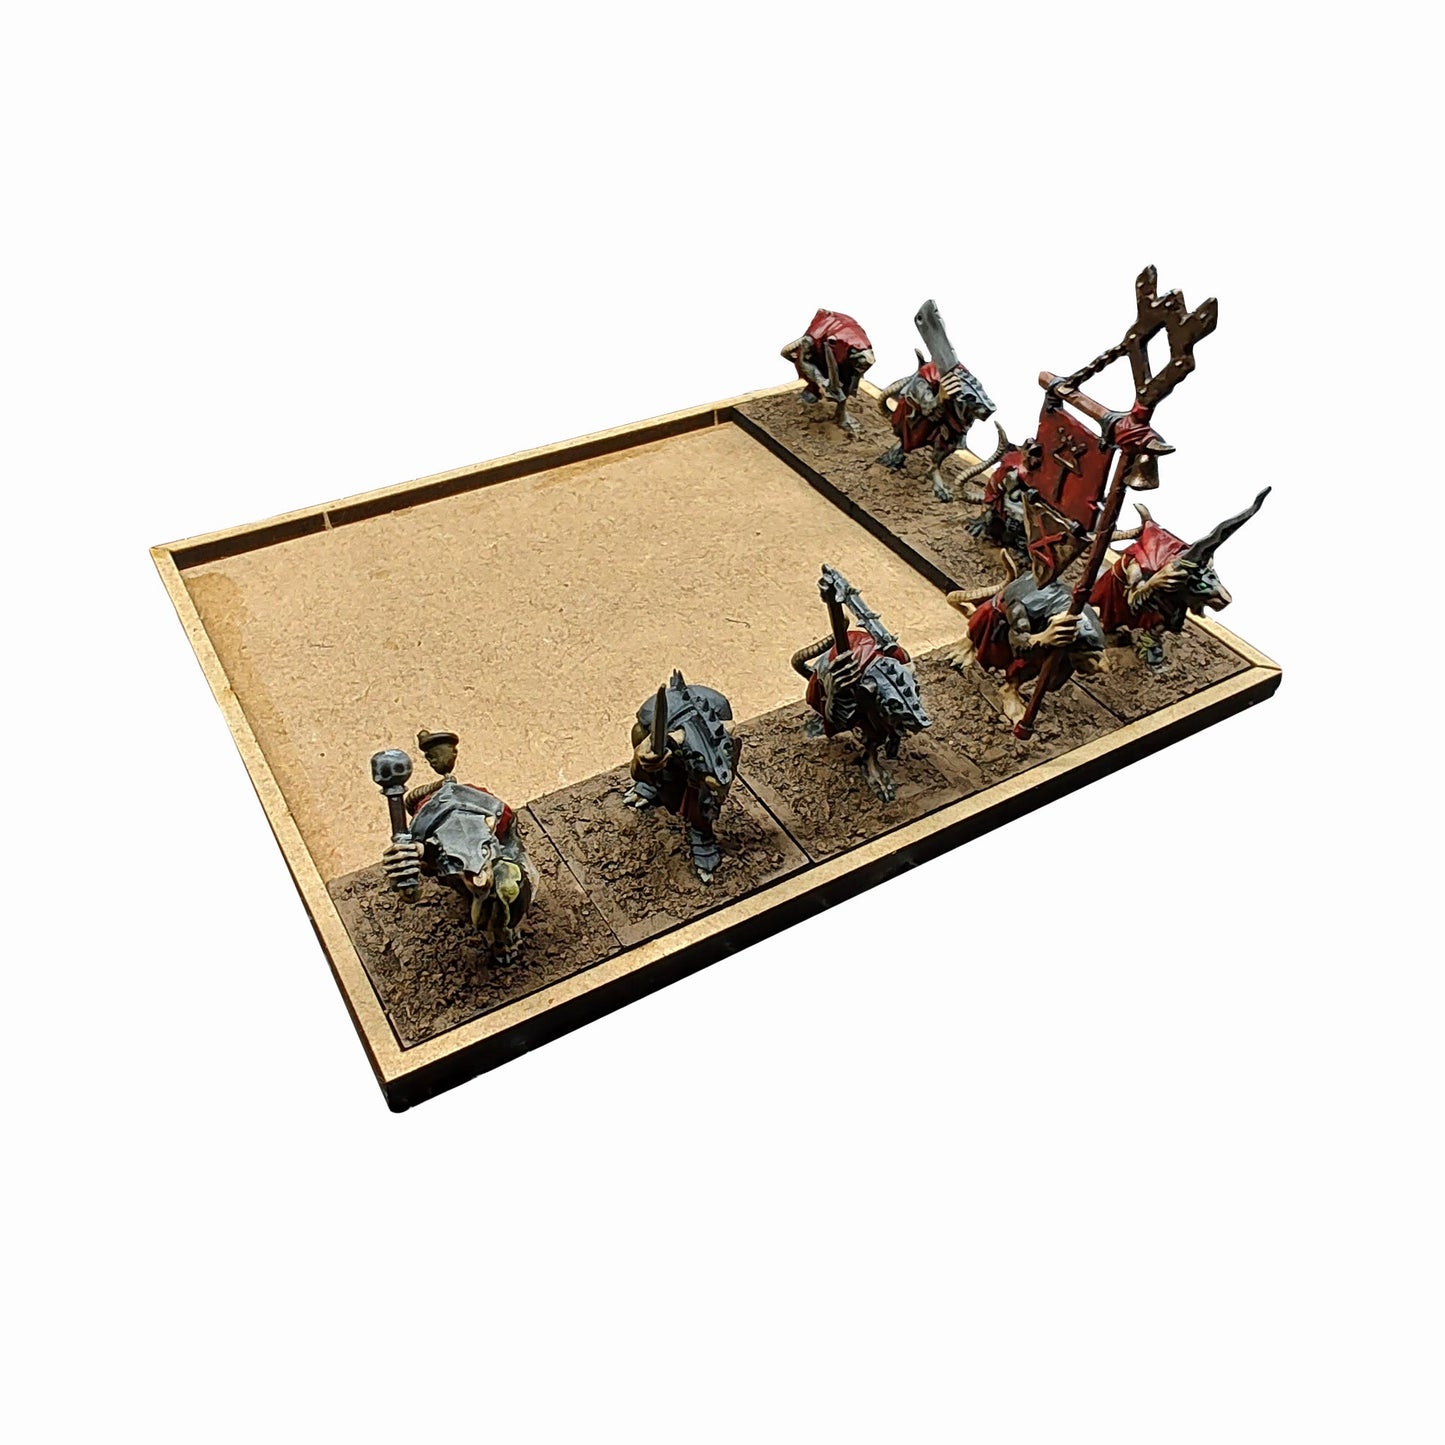 25mm Square Base Movement Trays - Battlefield Accessories